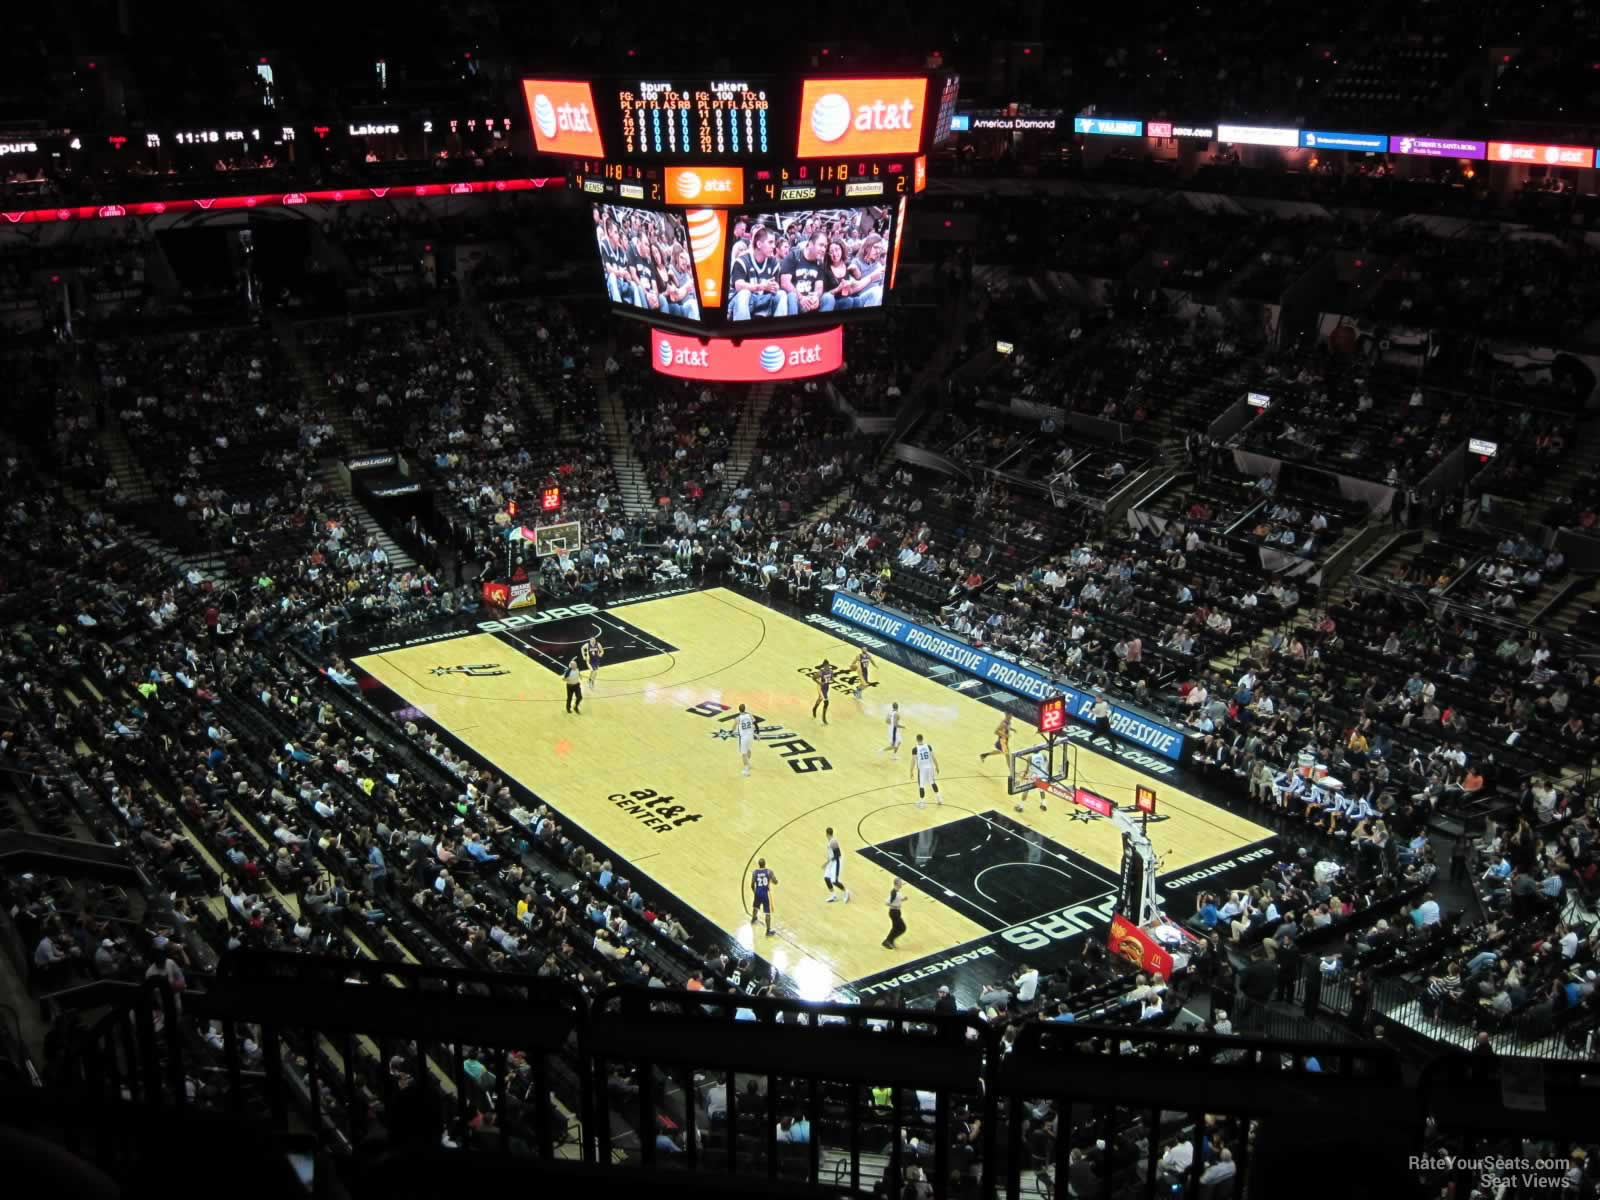 section 219, row 7 seat view  for basketball - at&t center